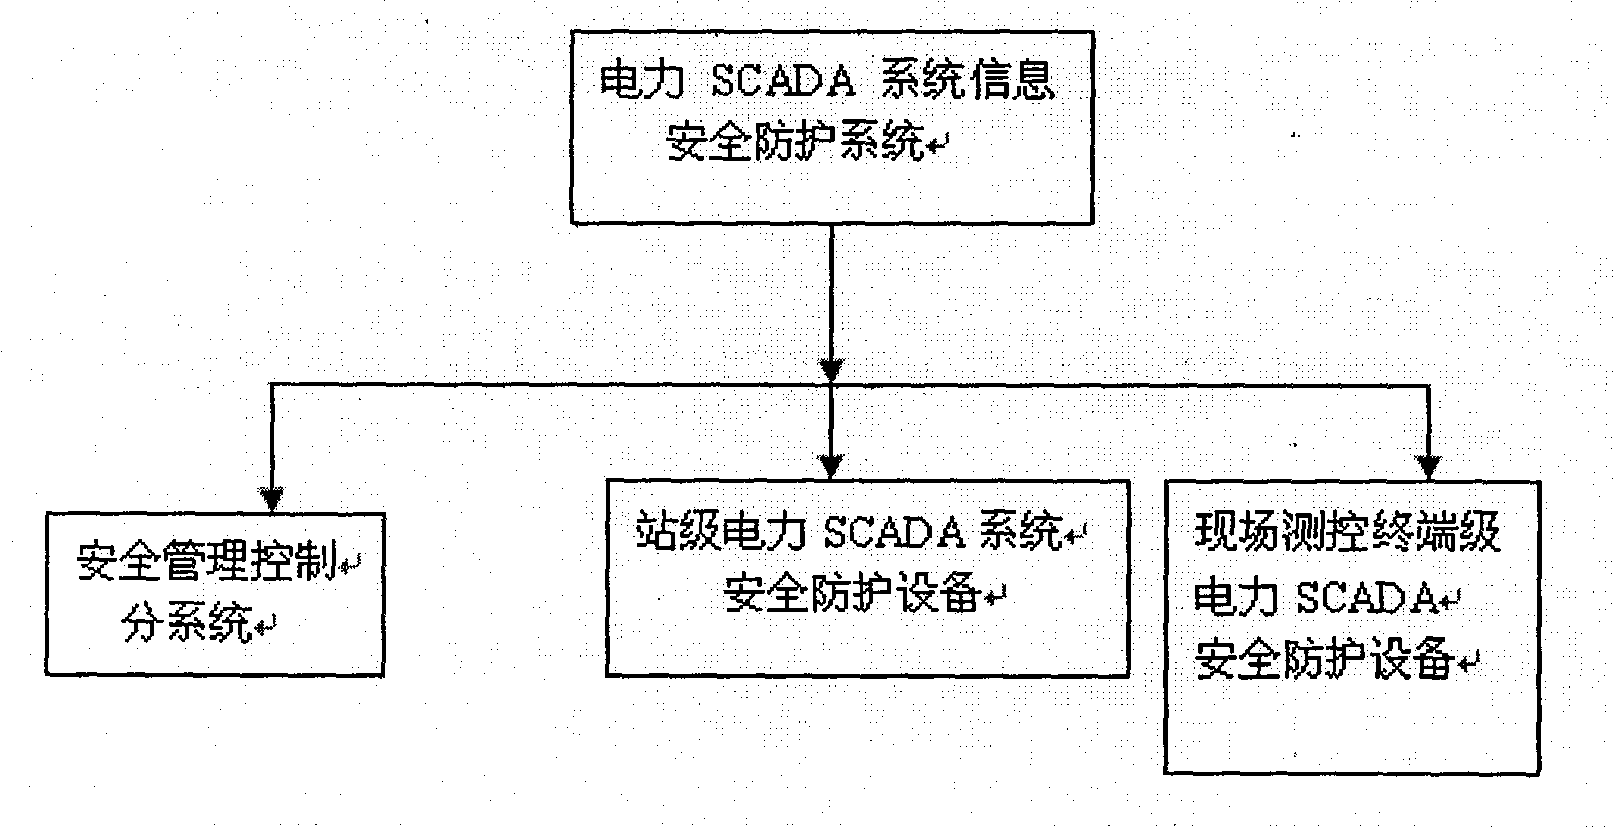 System for information safety protection of electric power supervisory control and data acquisition (SCADA) system